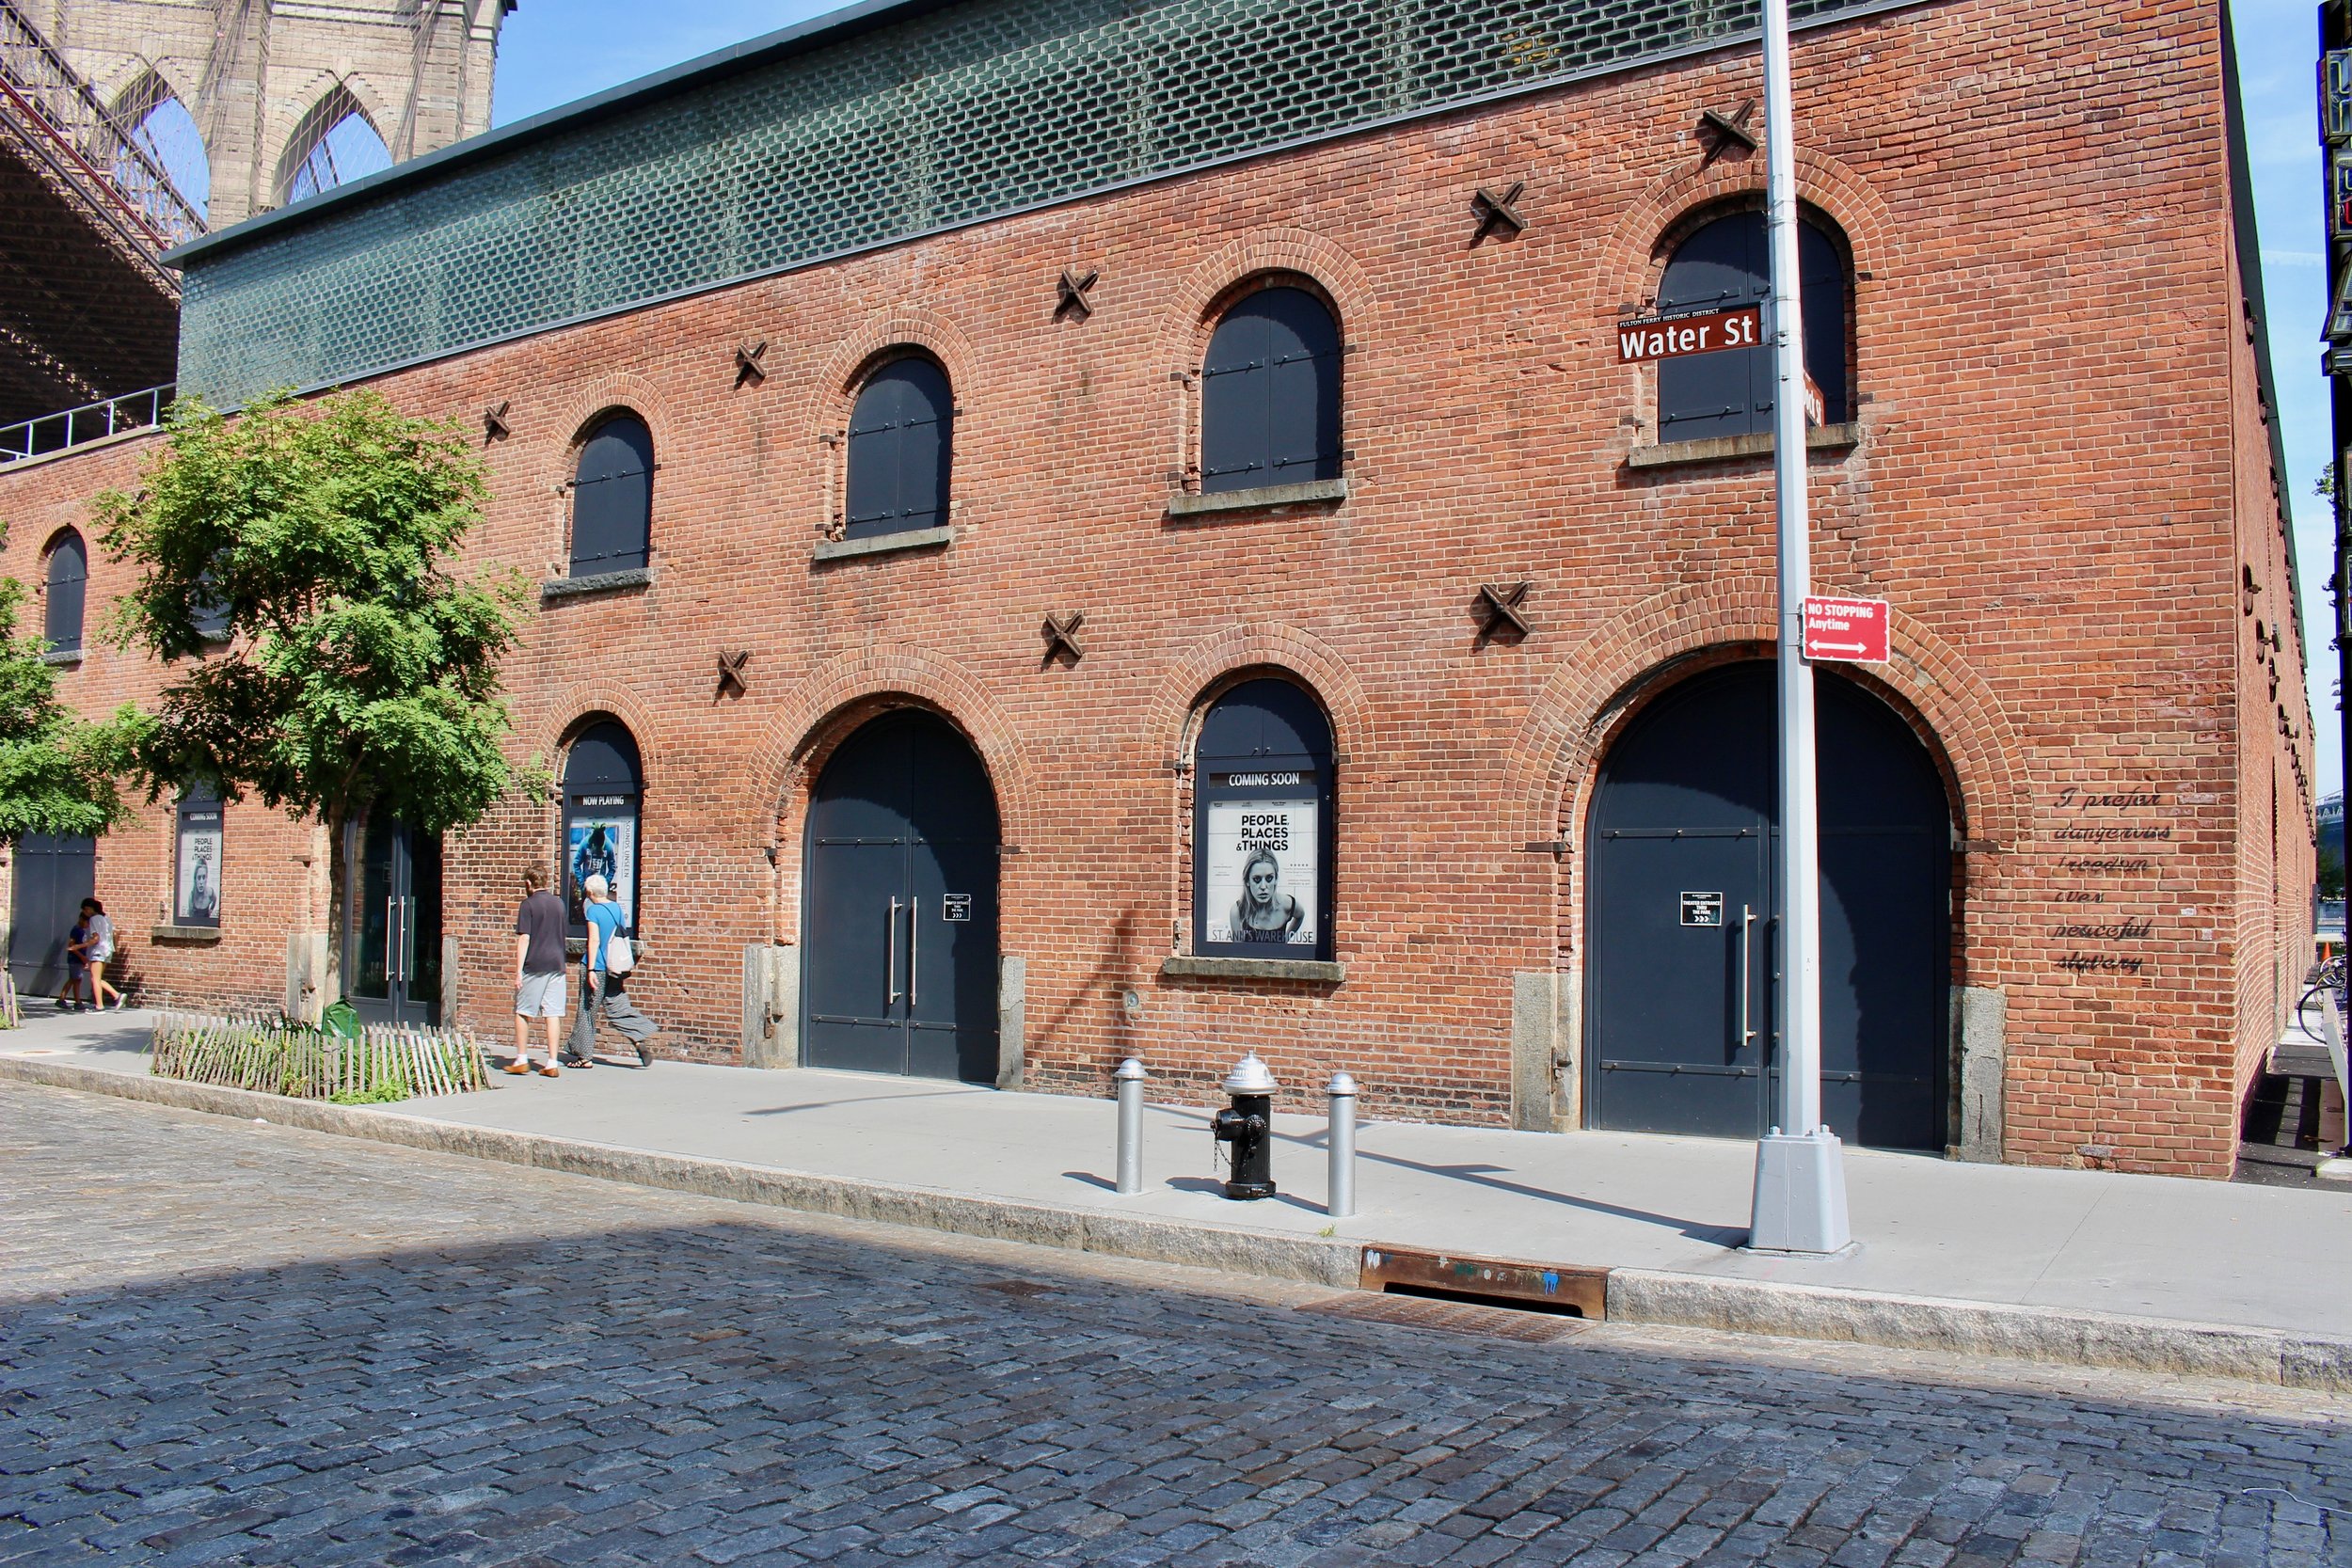  Stepping out of the Park onto Water Street, here is St. Ann's Warehouse, a converted performance space.&nbsp; Note the Brooklyn Bridge just behind it. 